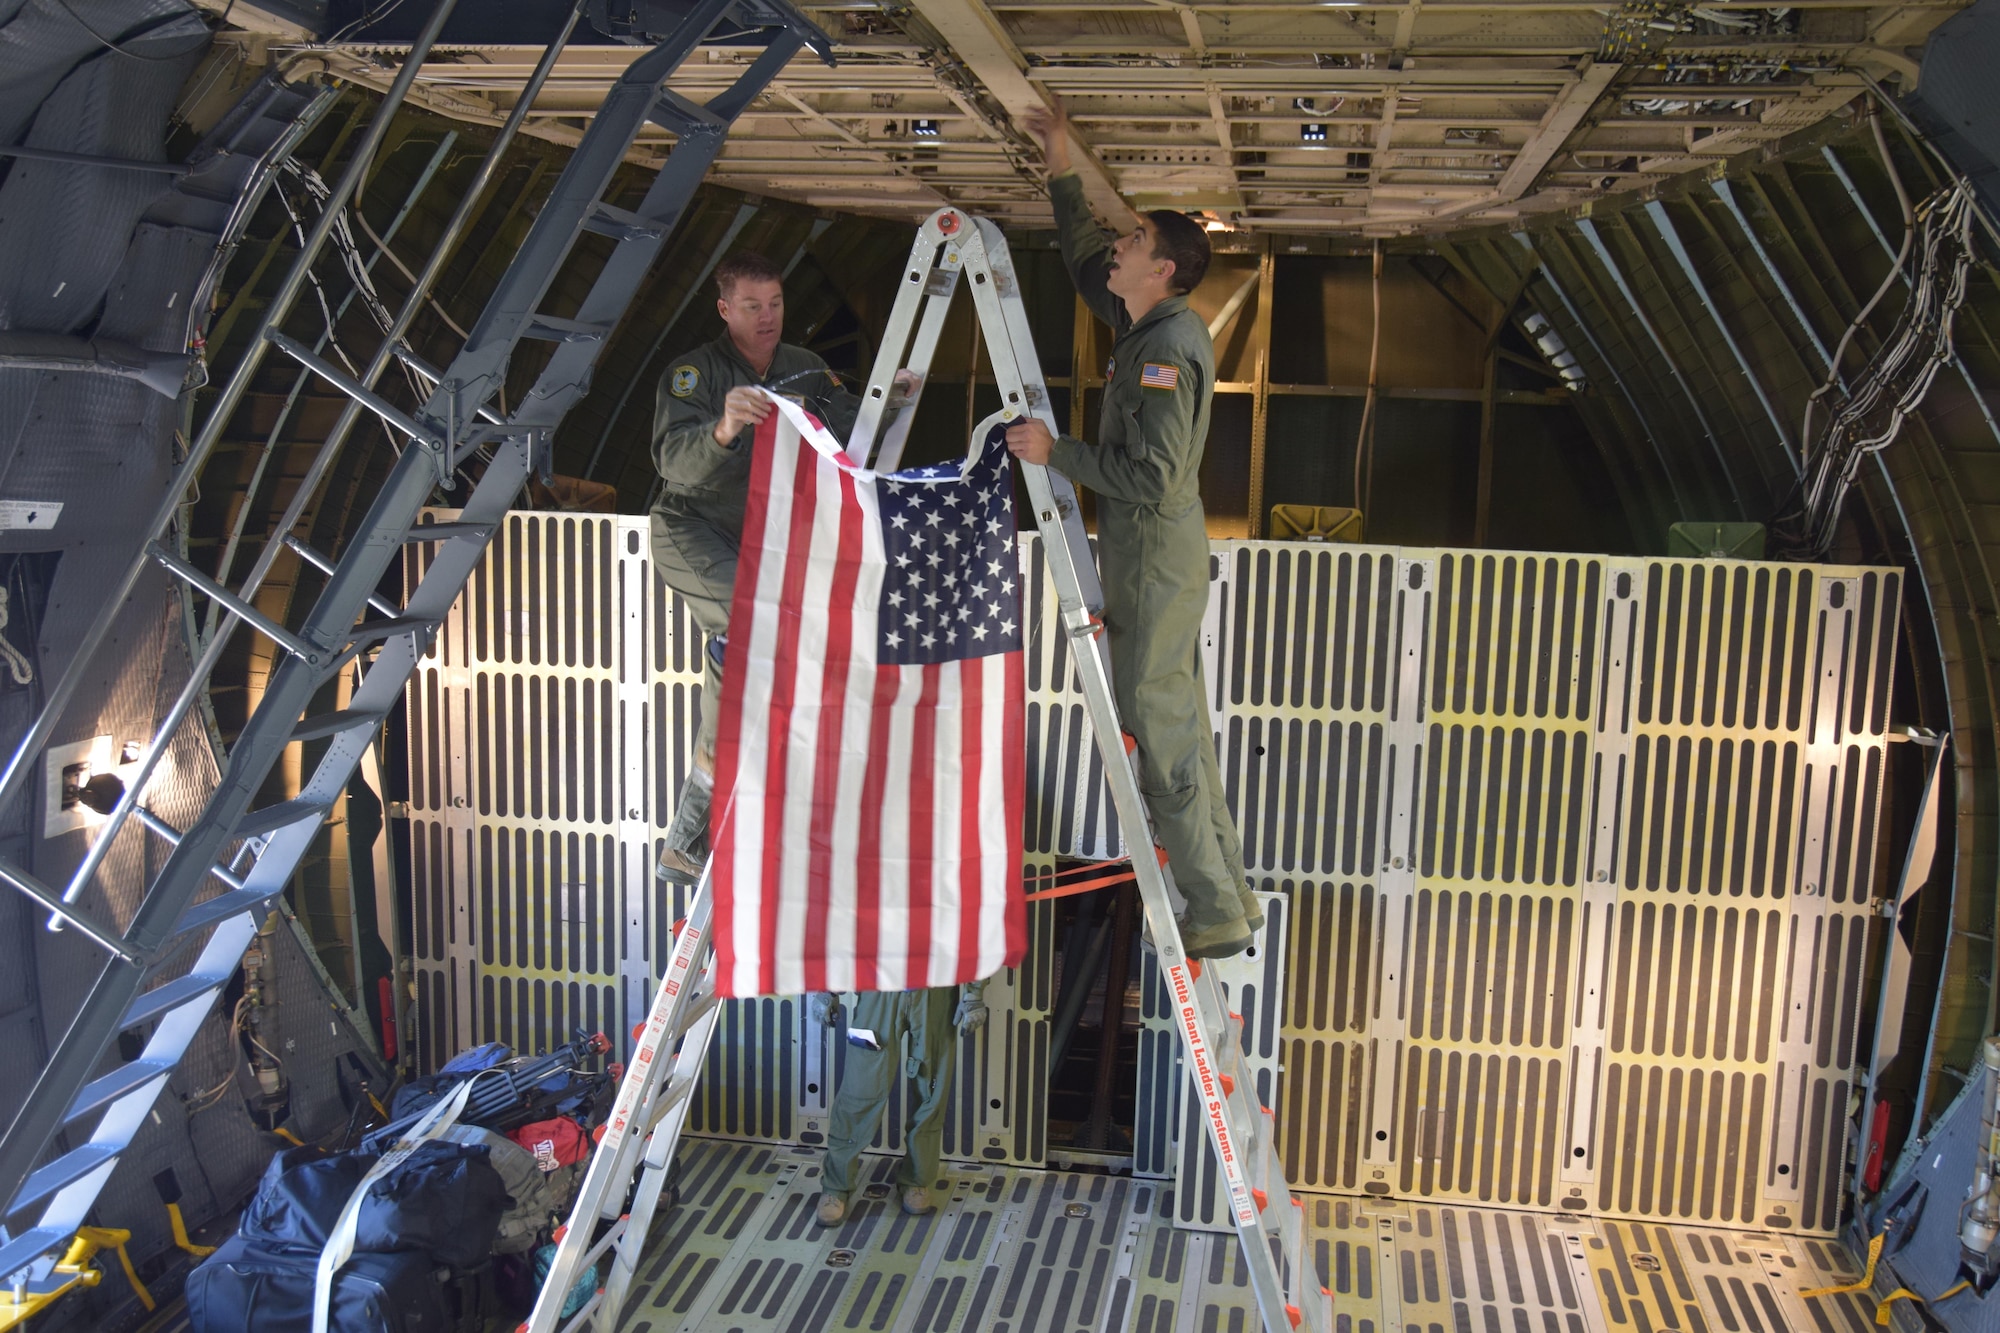 Senior Master Sgt. Kevin Foerster, a 68th Airlift Squadron loadmaster, and Senior Airmen Antonio Farias, a 433rd Aircraft Maintenance Squadron crew chief, climb a ladder to affix a United States flag to the ceiling of an Air Force Reserve Command C-5M Super Galaxy cargo bay prior to takeoff from Colorado Springs, Colorado, Oct. 1, 2017. The 433rd Airlift Wing Citizen Airmen have flown 17 missions to aid hurricane recovery efforts in the United States and its territories to include Puerto Rico and the U.S. Virgin Islands.  (U.S.  Air Force photo by Tech. Sgt. Carlos J. Treviño)